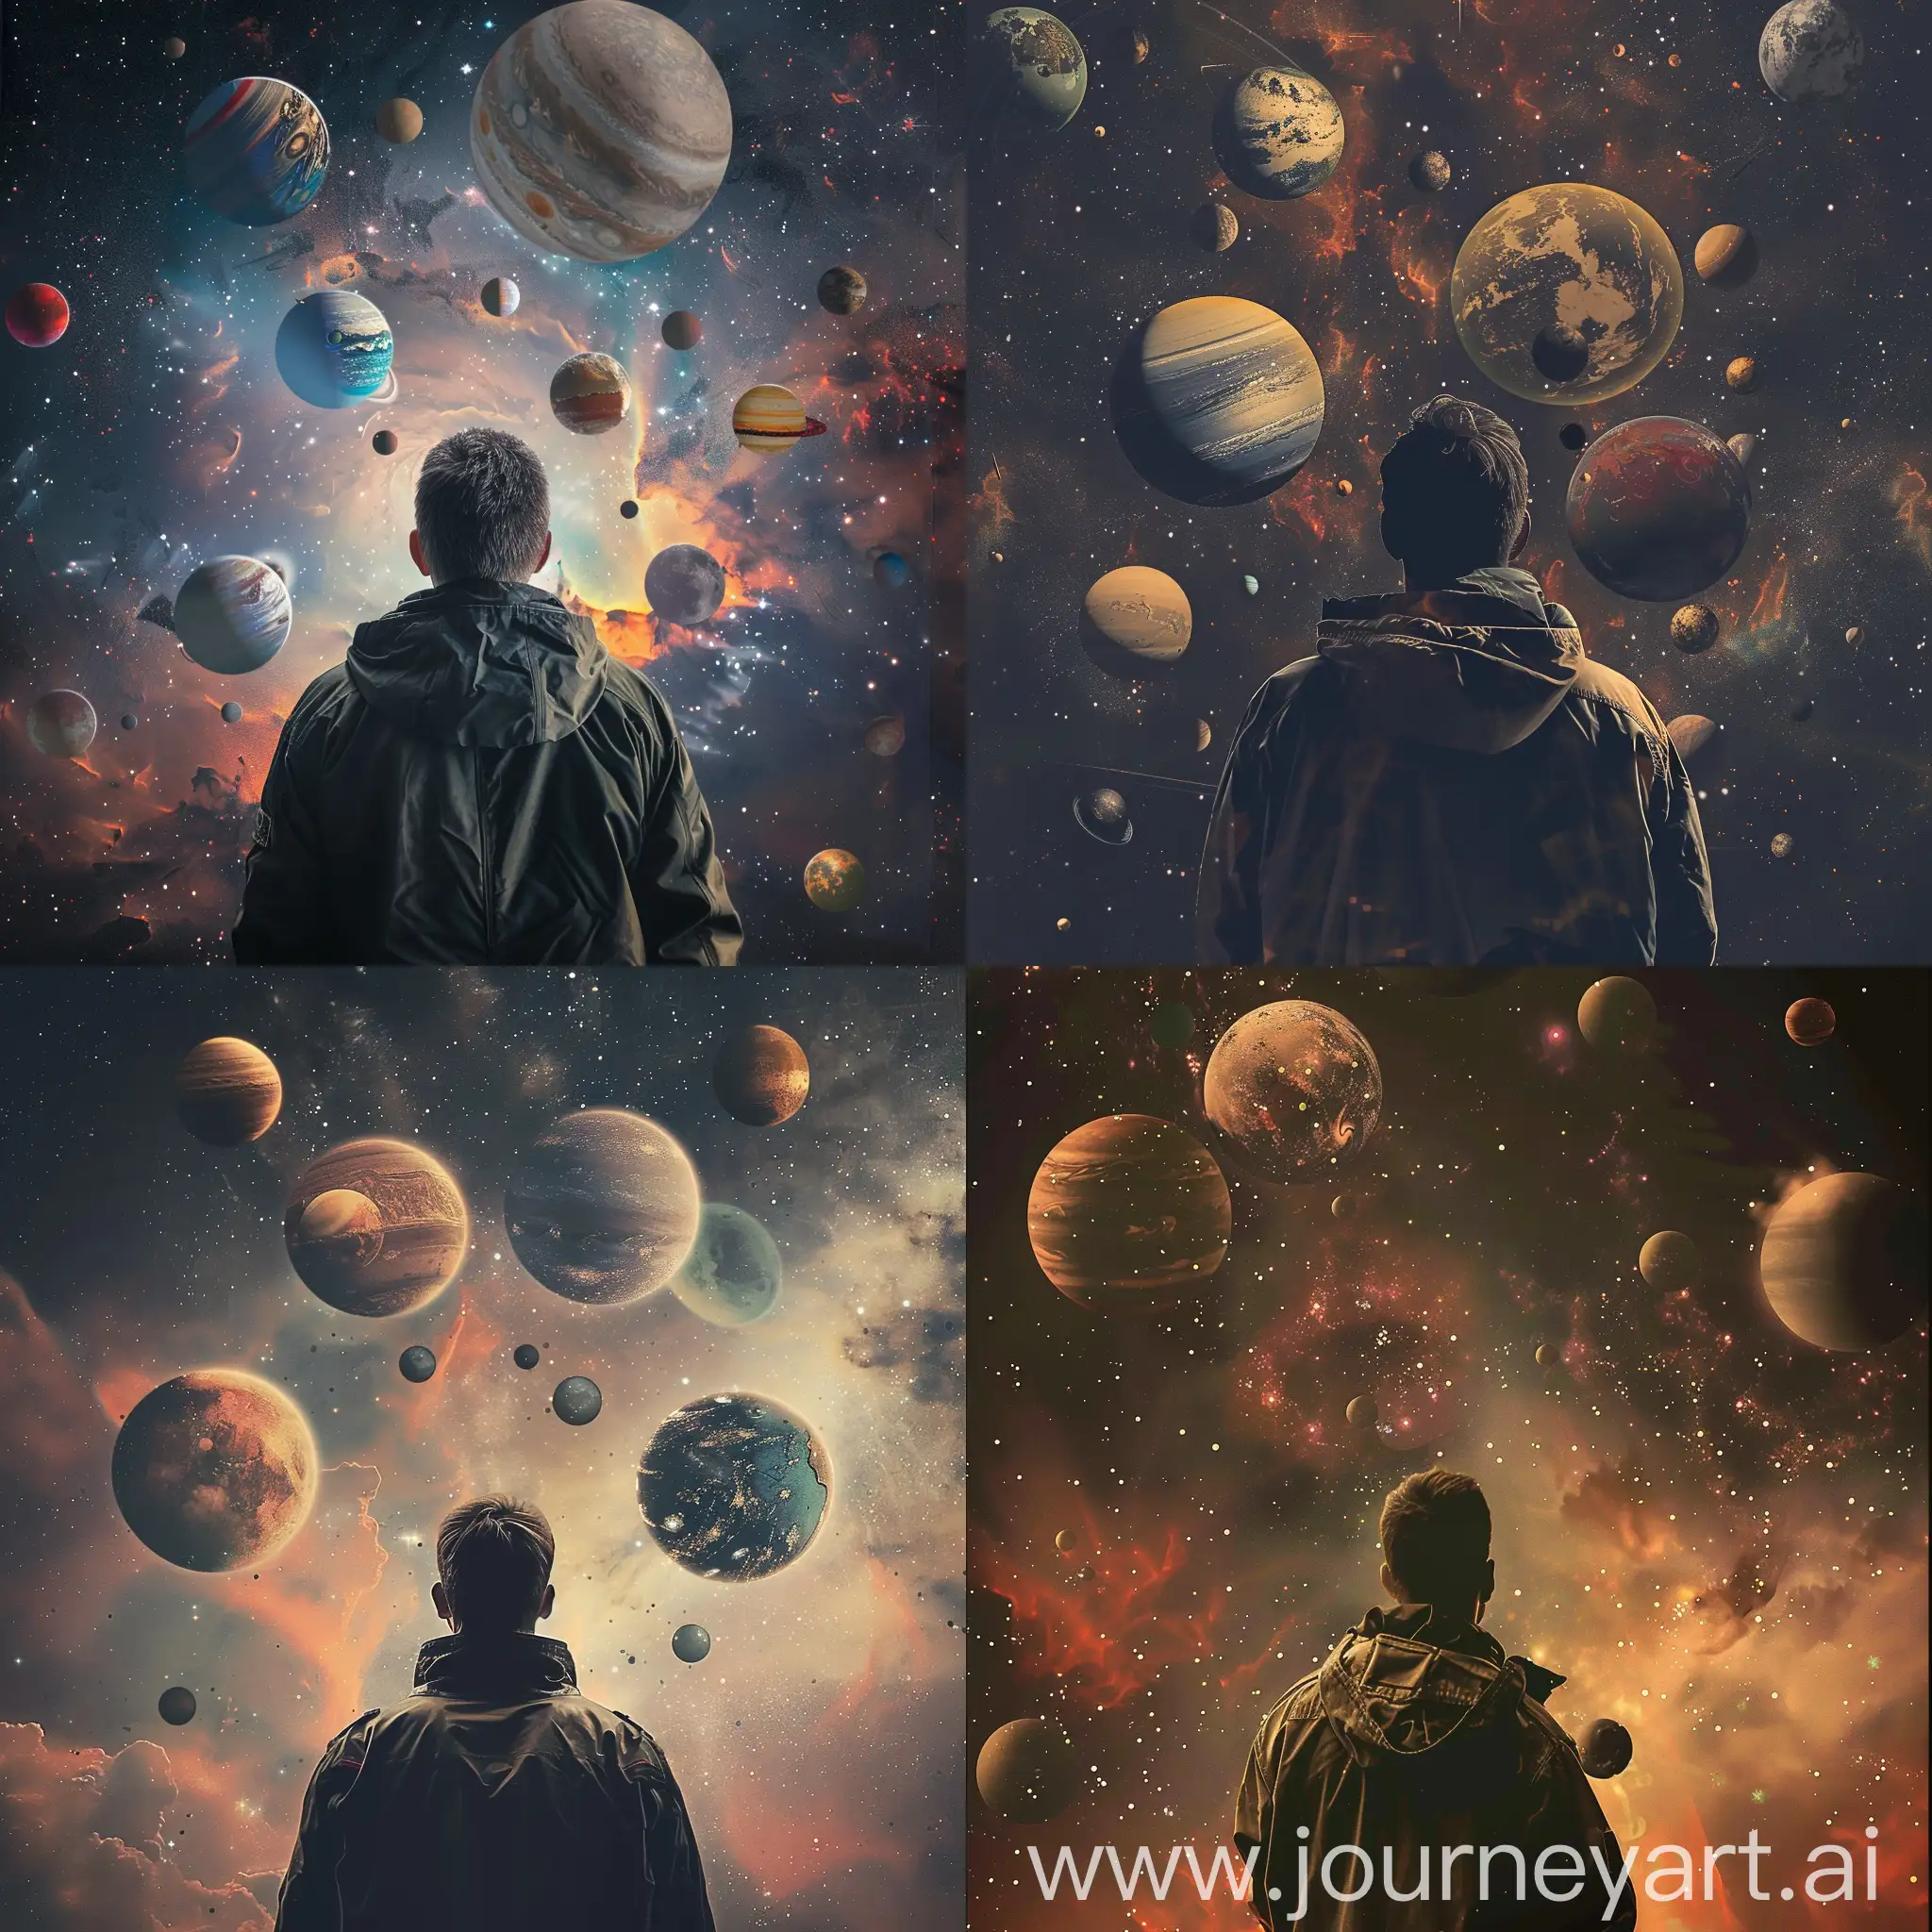 Design an image of a men in jacket in a space filled with floating planets